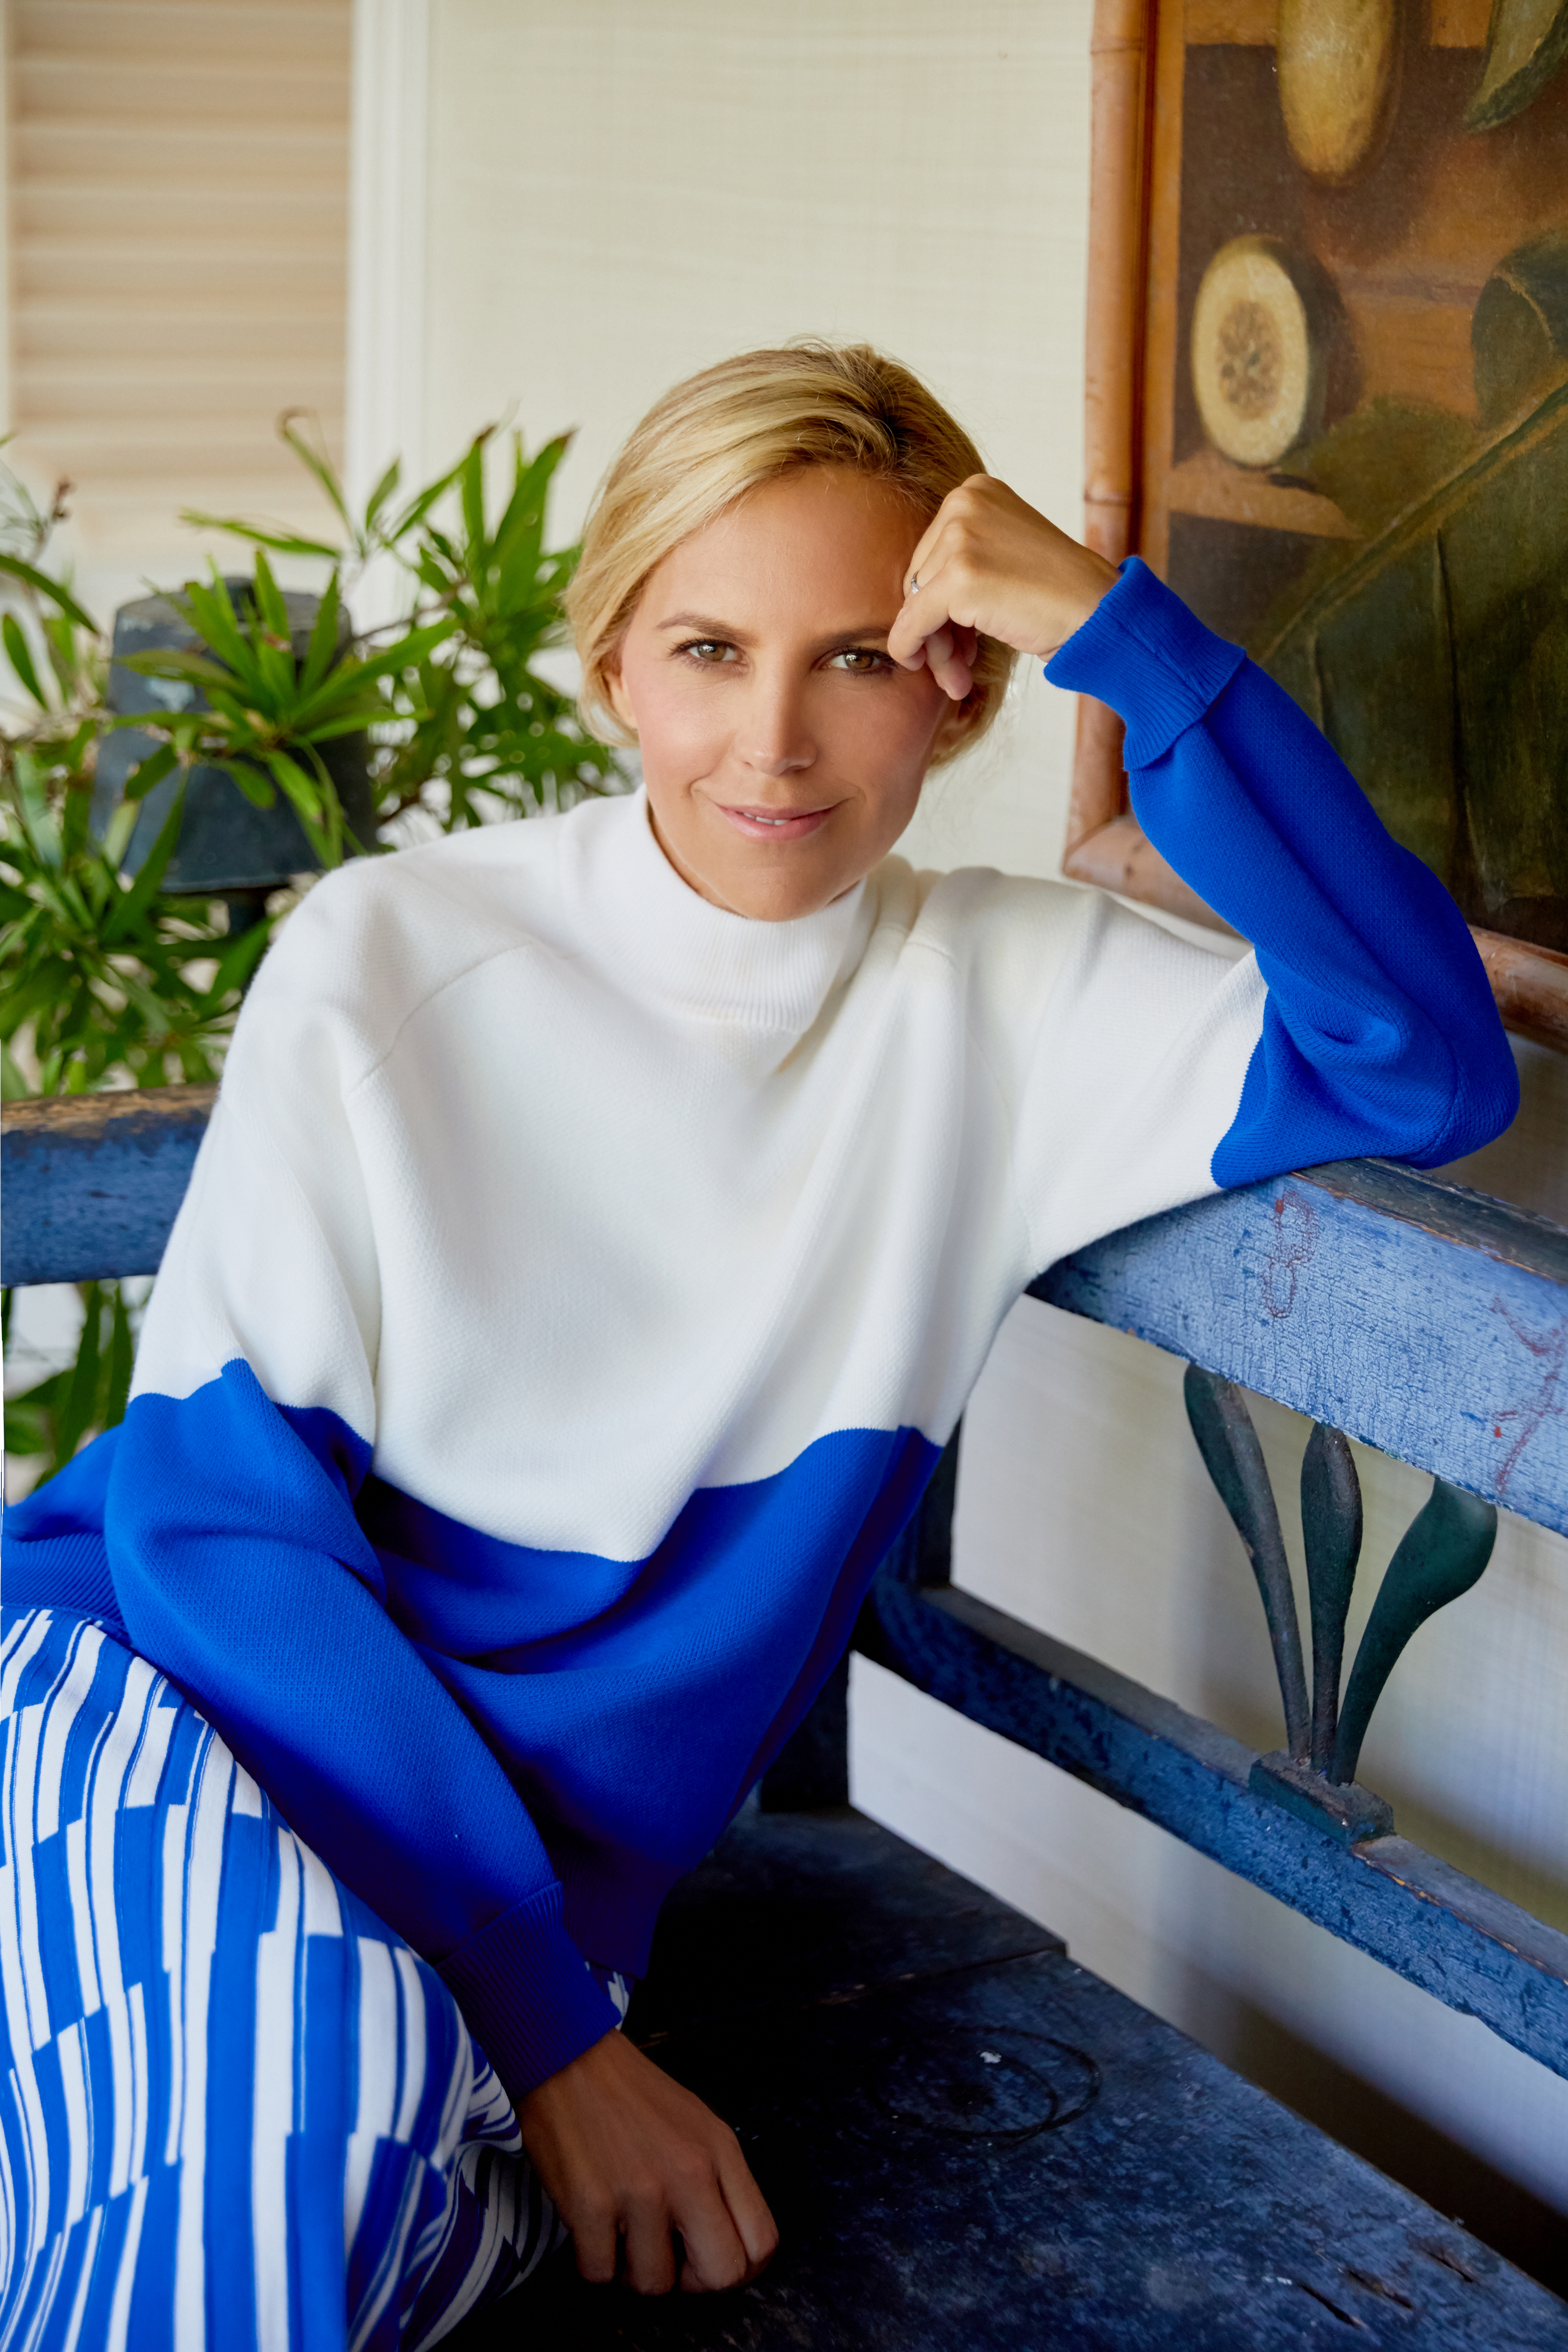 Shiseido and Tory Burch Announce Long-Term Beauty Partnership Agreement |  Business Wire